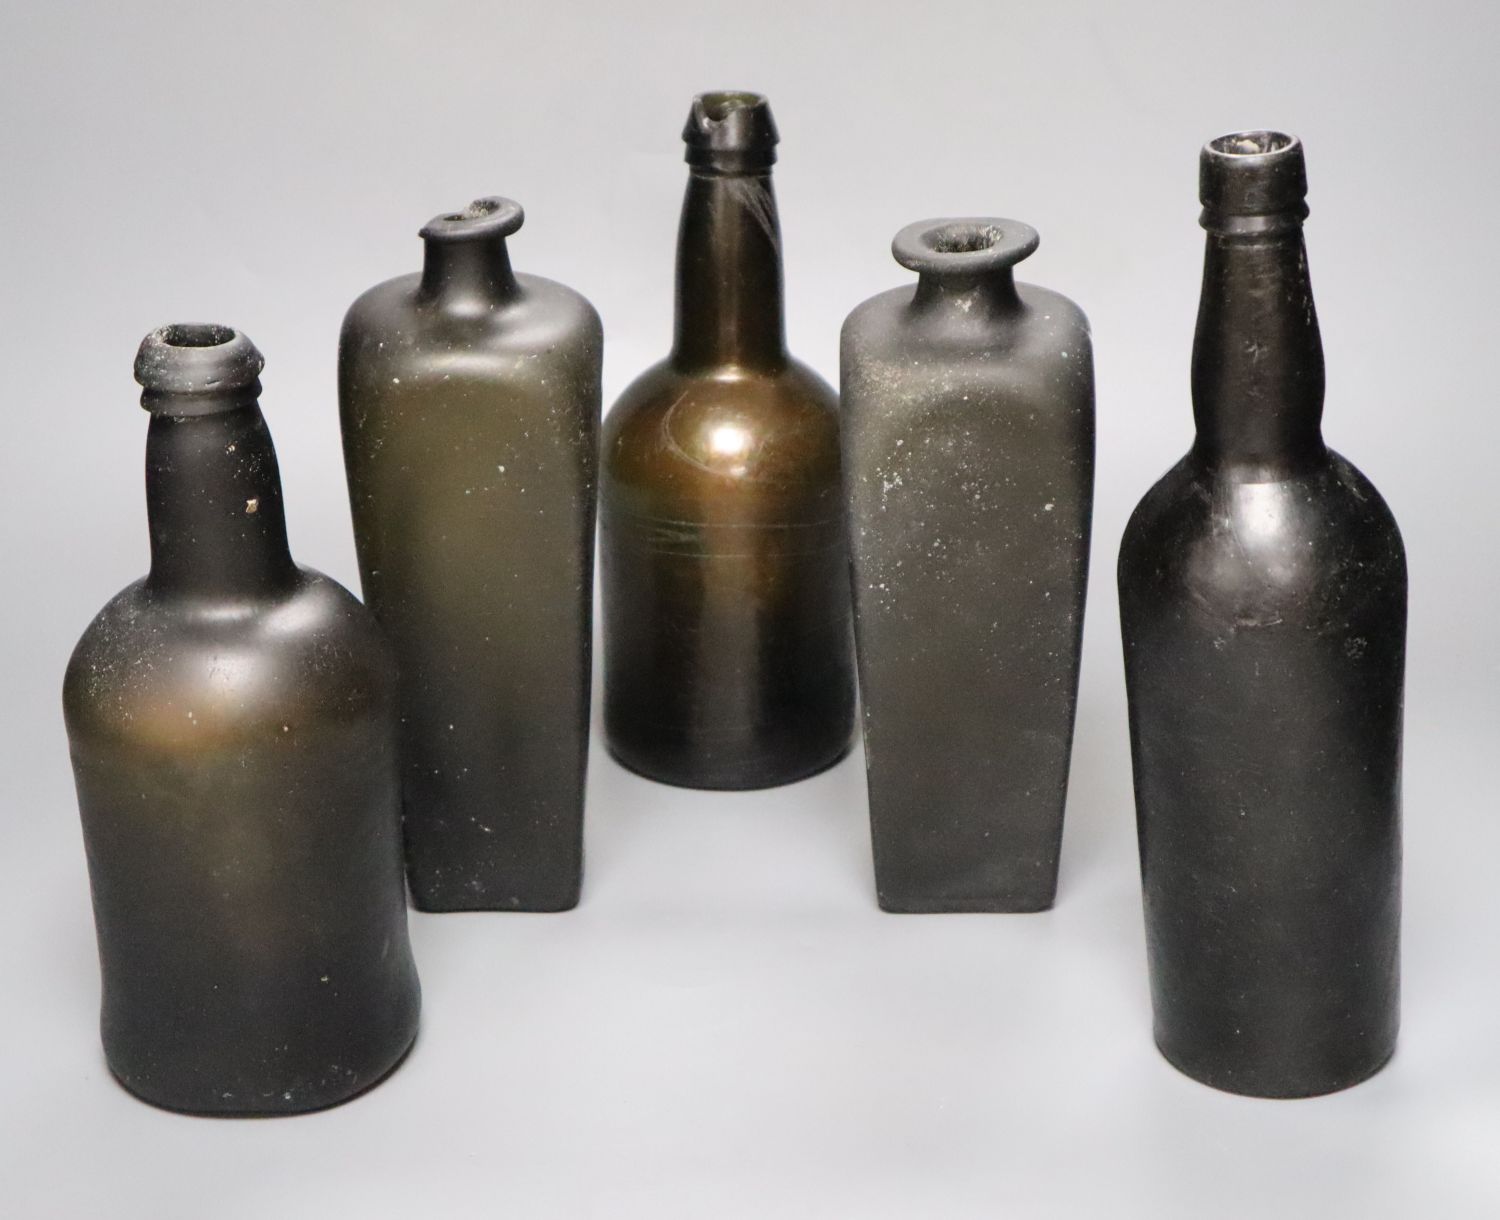 Five antique glass bottles, including two 18th century pig snout gin bottles,